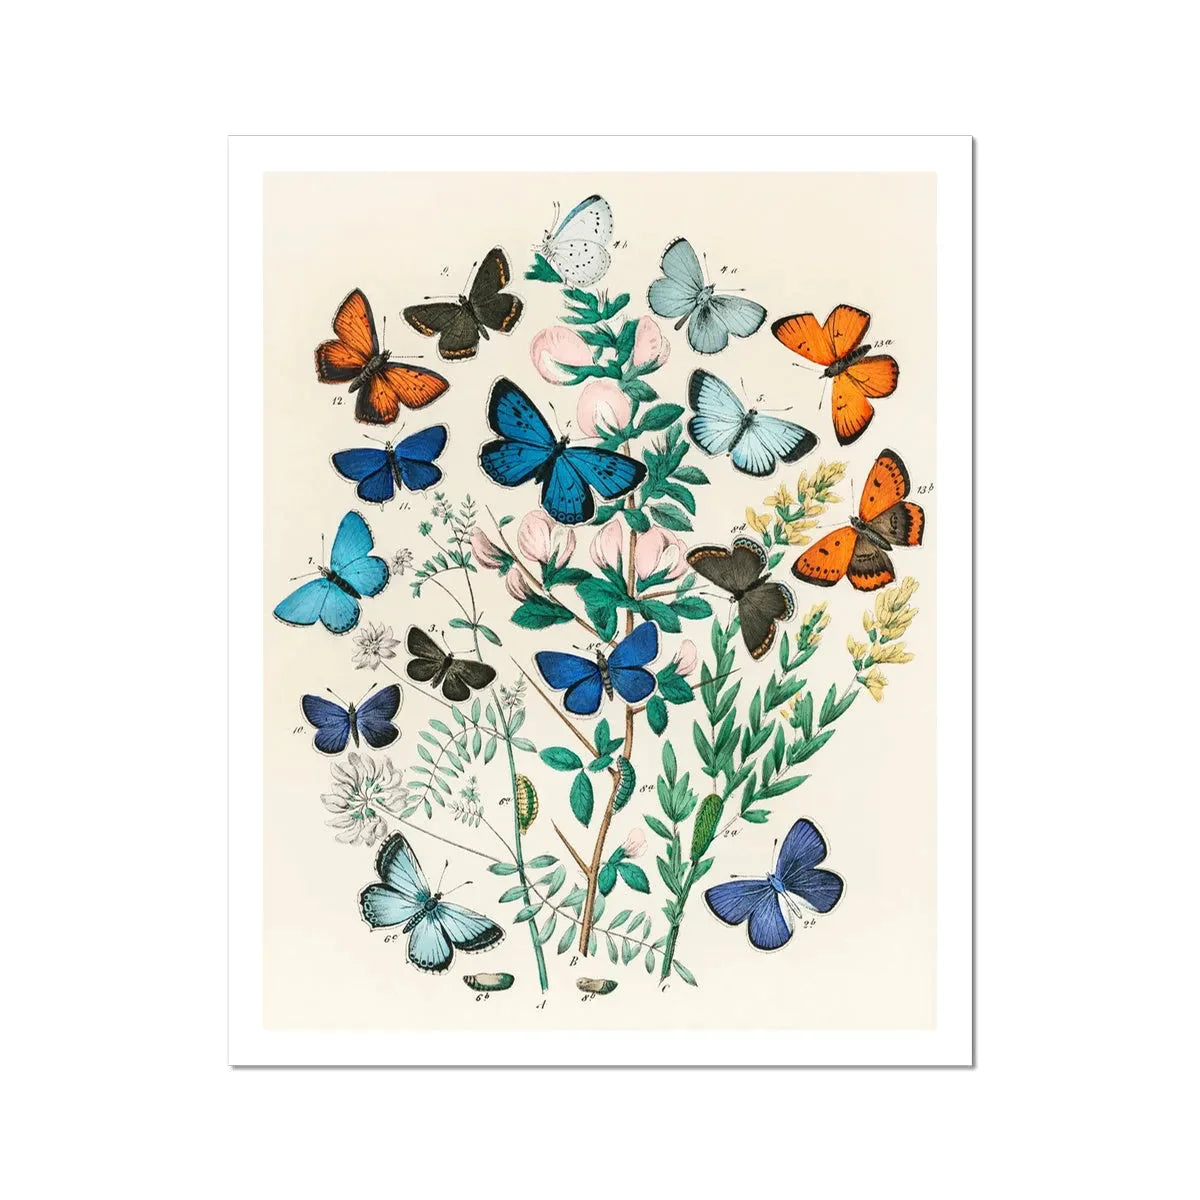 European Butterflies And Moths By William Forsell Kirby Fine Art Print - 16’x20’ - Posters Prints & Visual Artwork